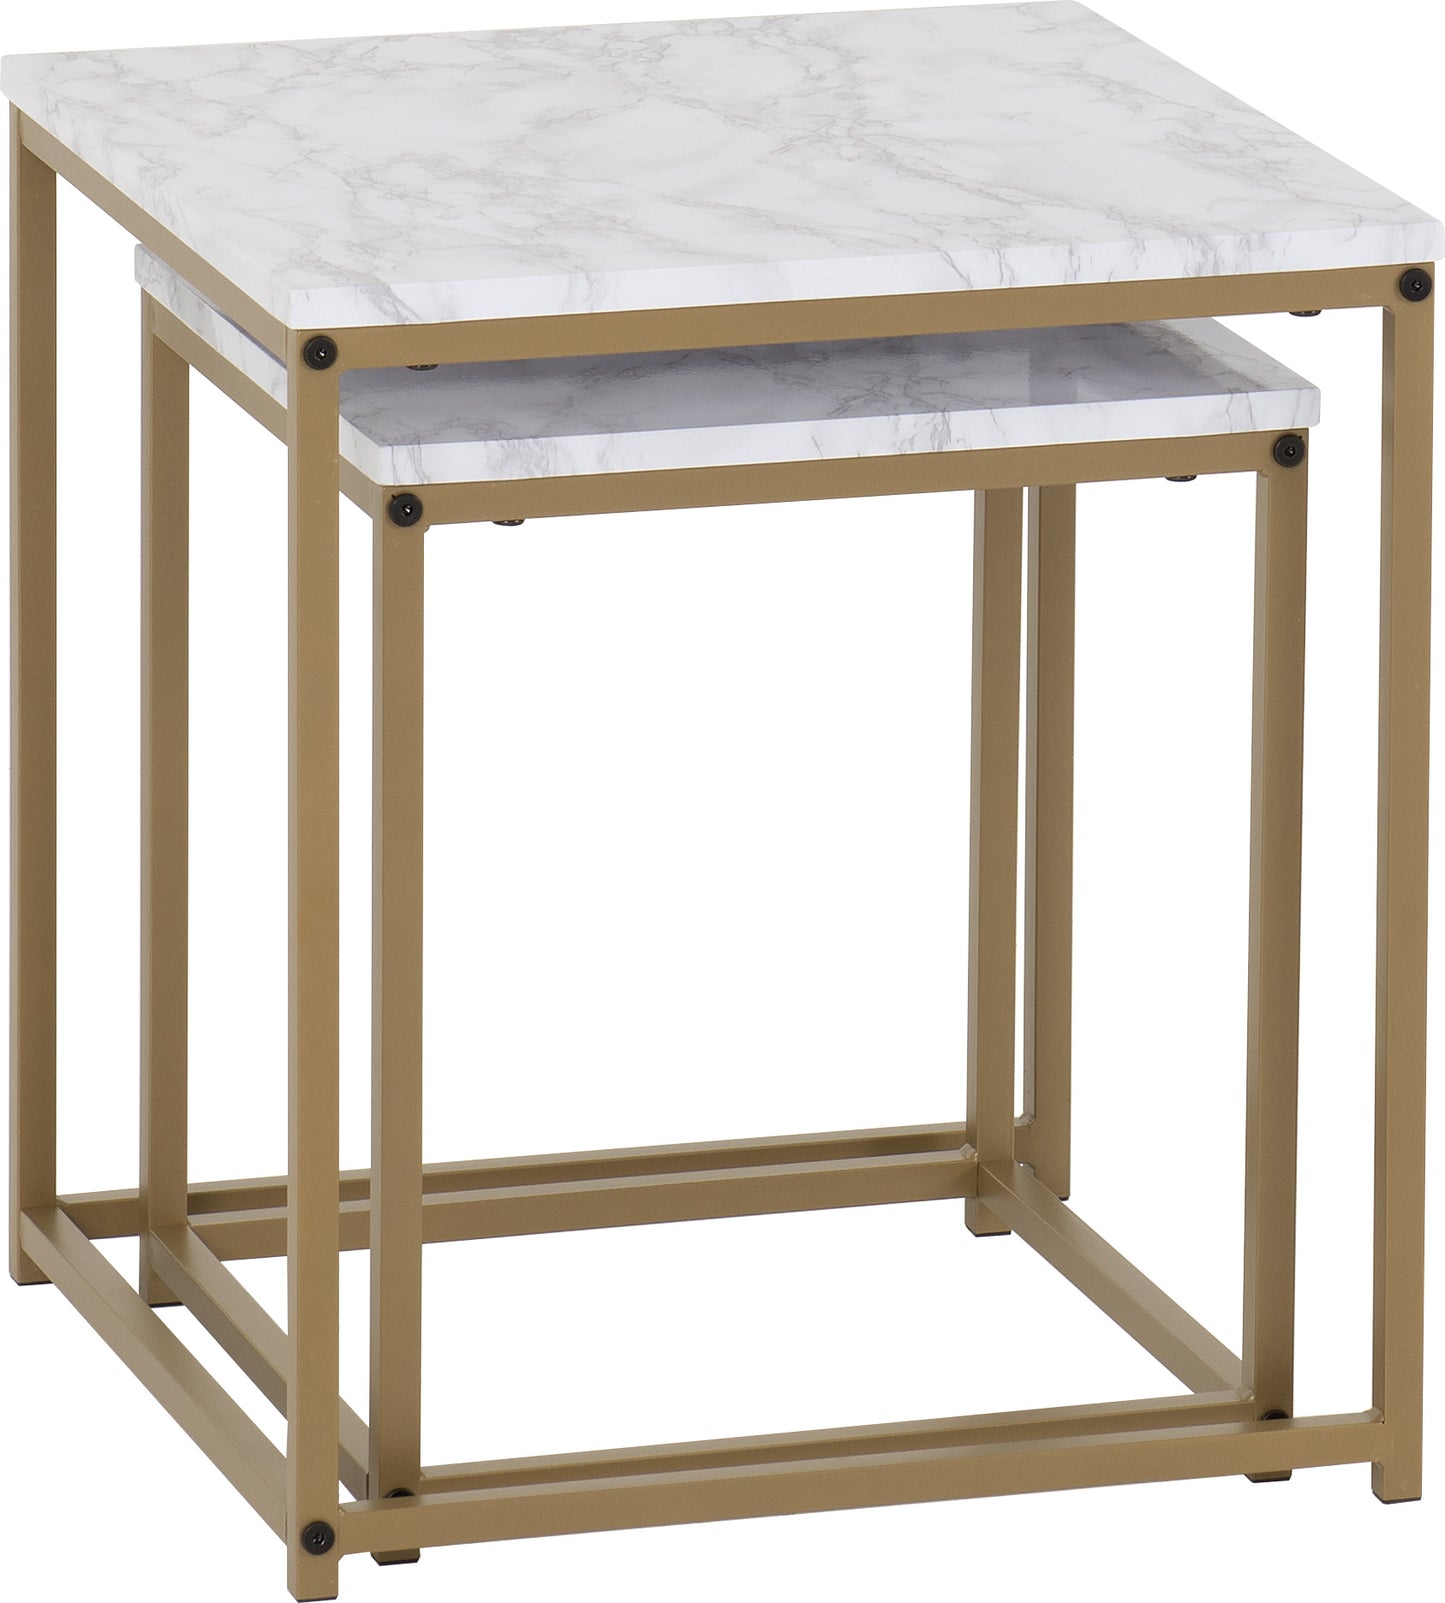 DALLAS NEST OF 2 TABLES - MARBLE/GOLD EFFECT